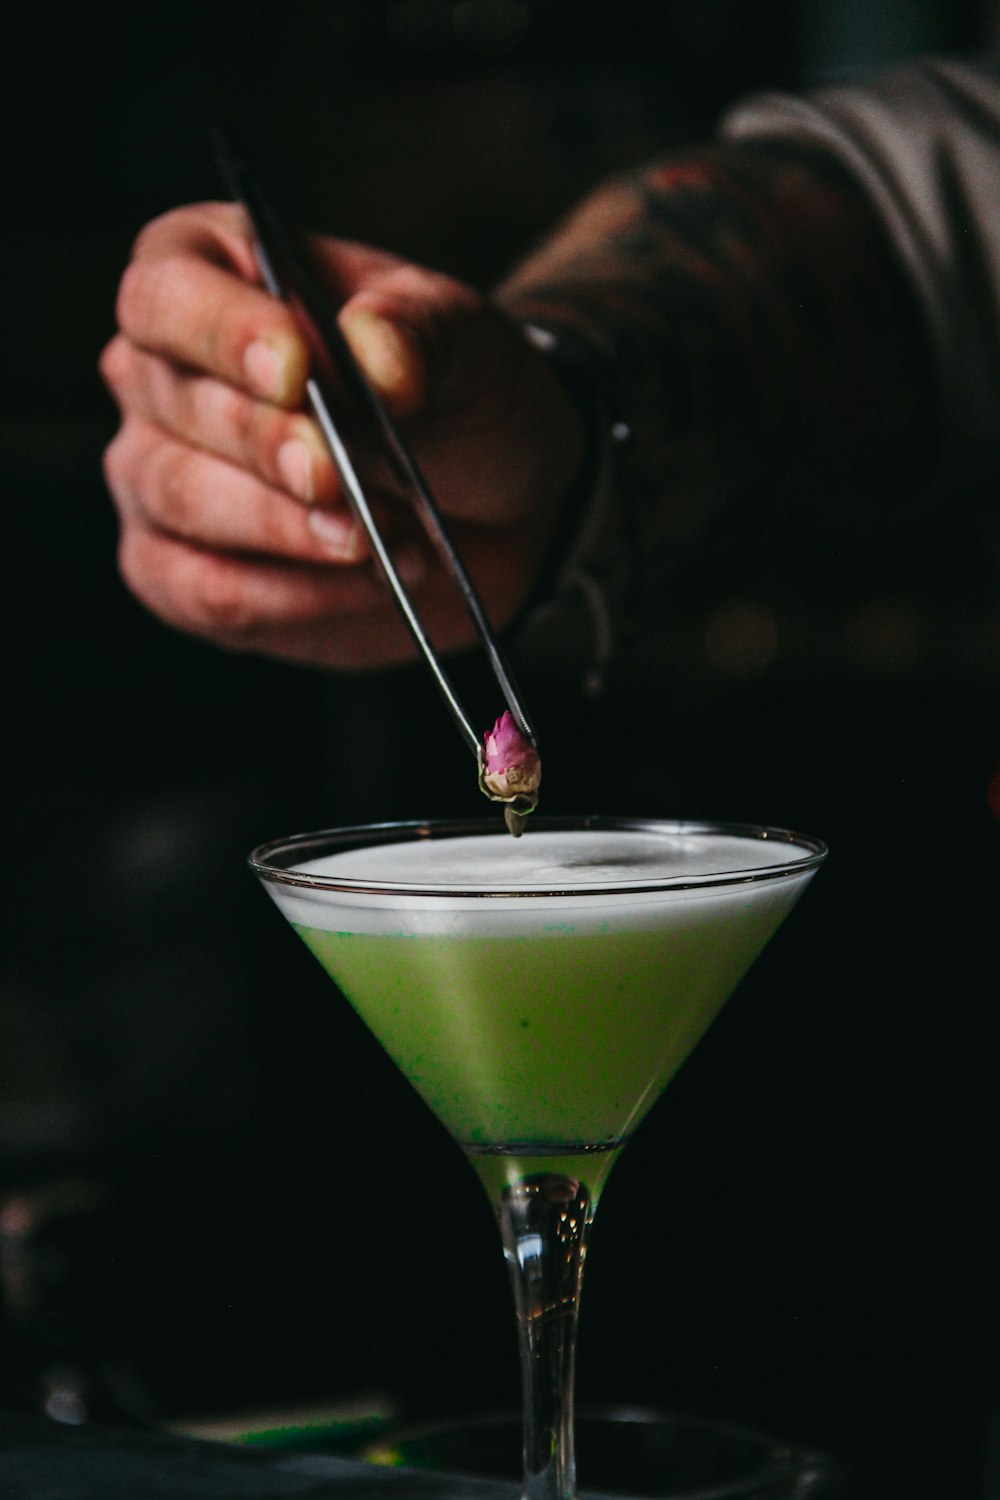 a person is preparing a drink in a martini glass